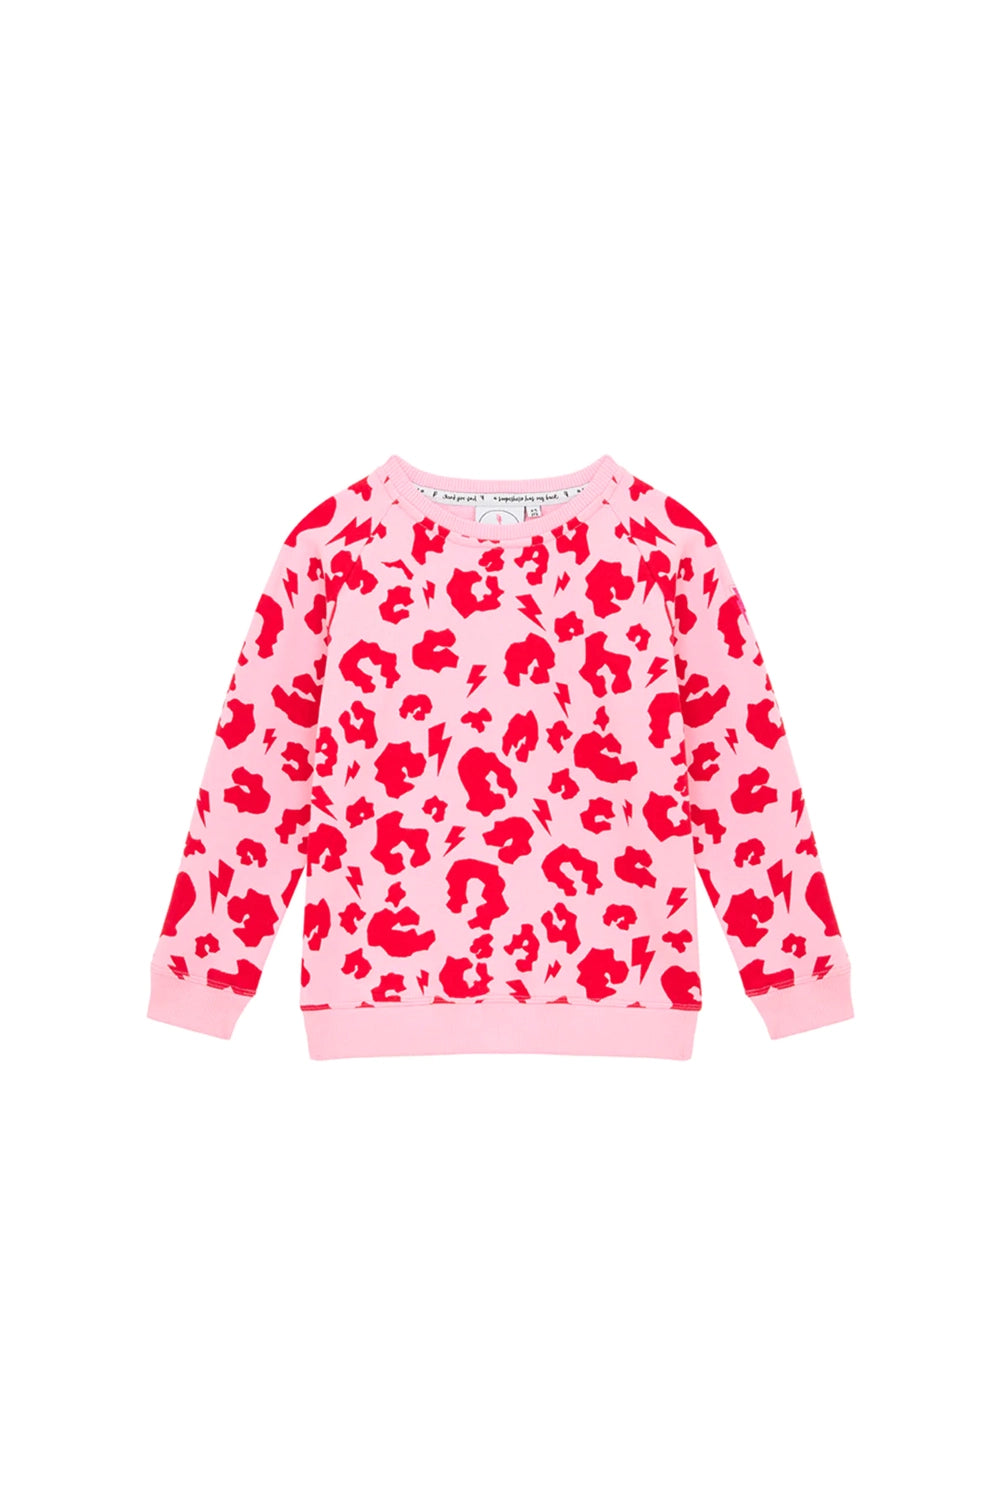 Super Soft Sweatshirt - Pink with Red Leopard Print and Lightning Bolt ...